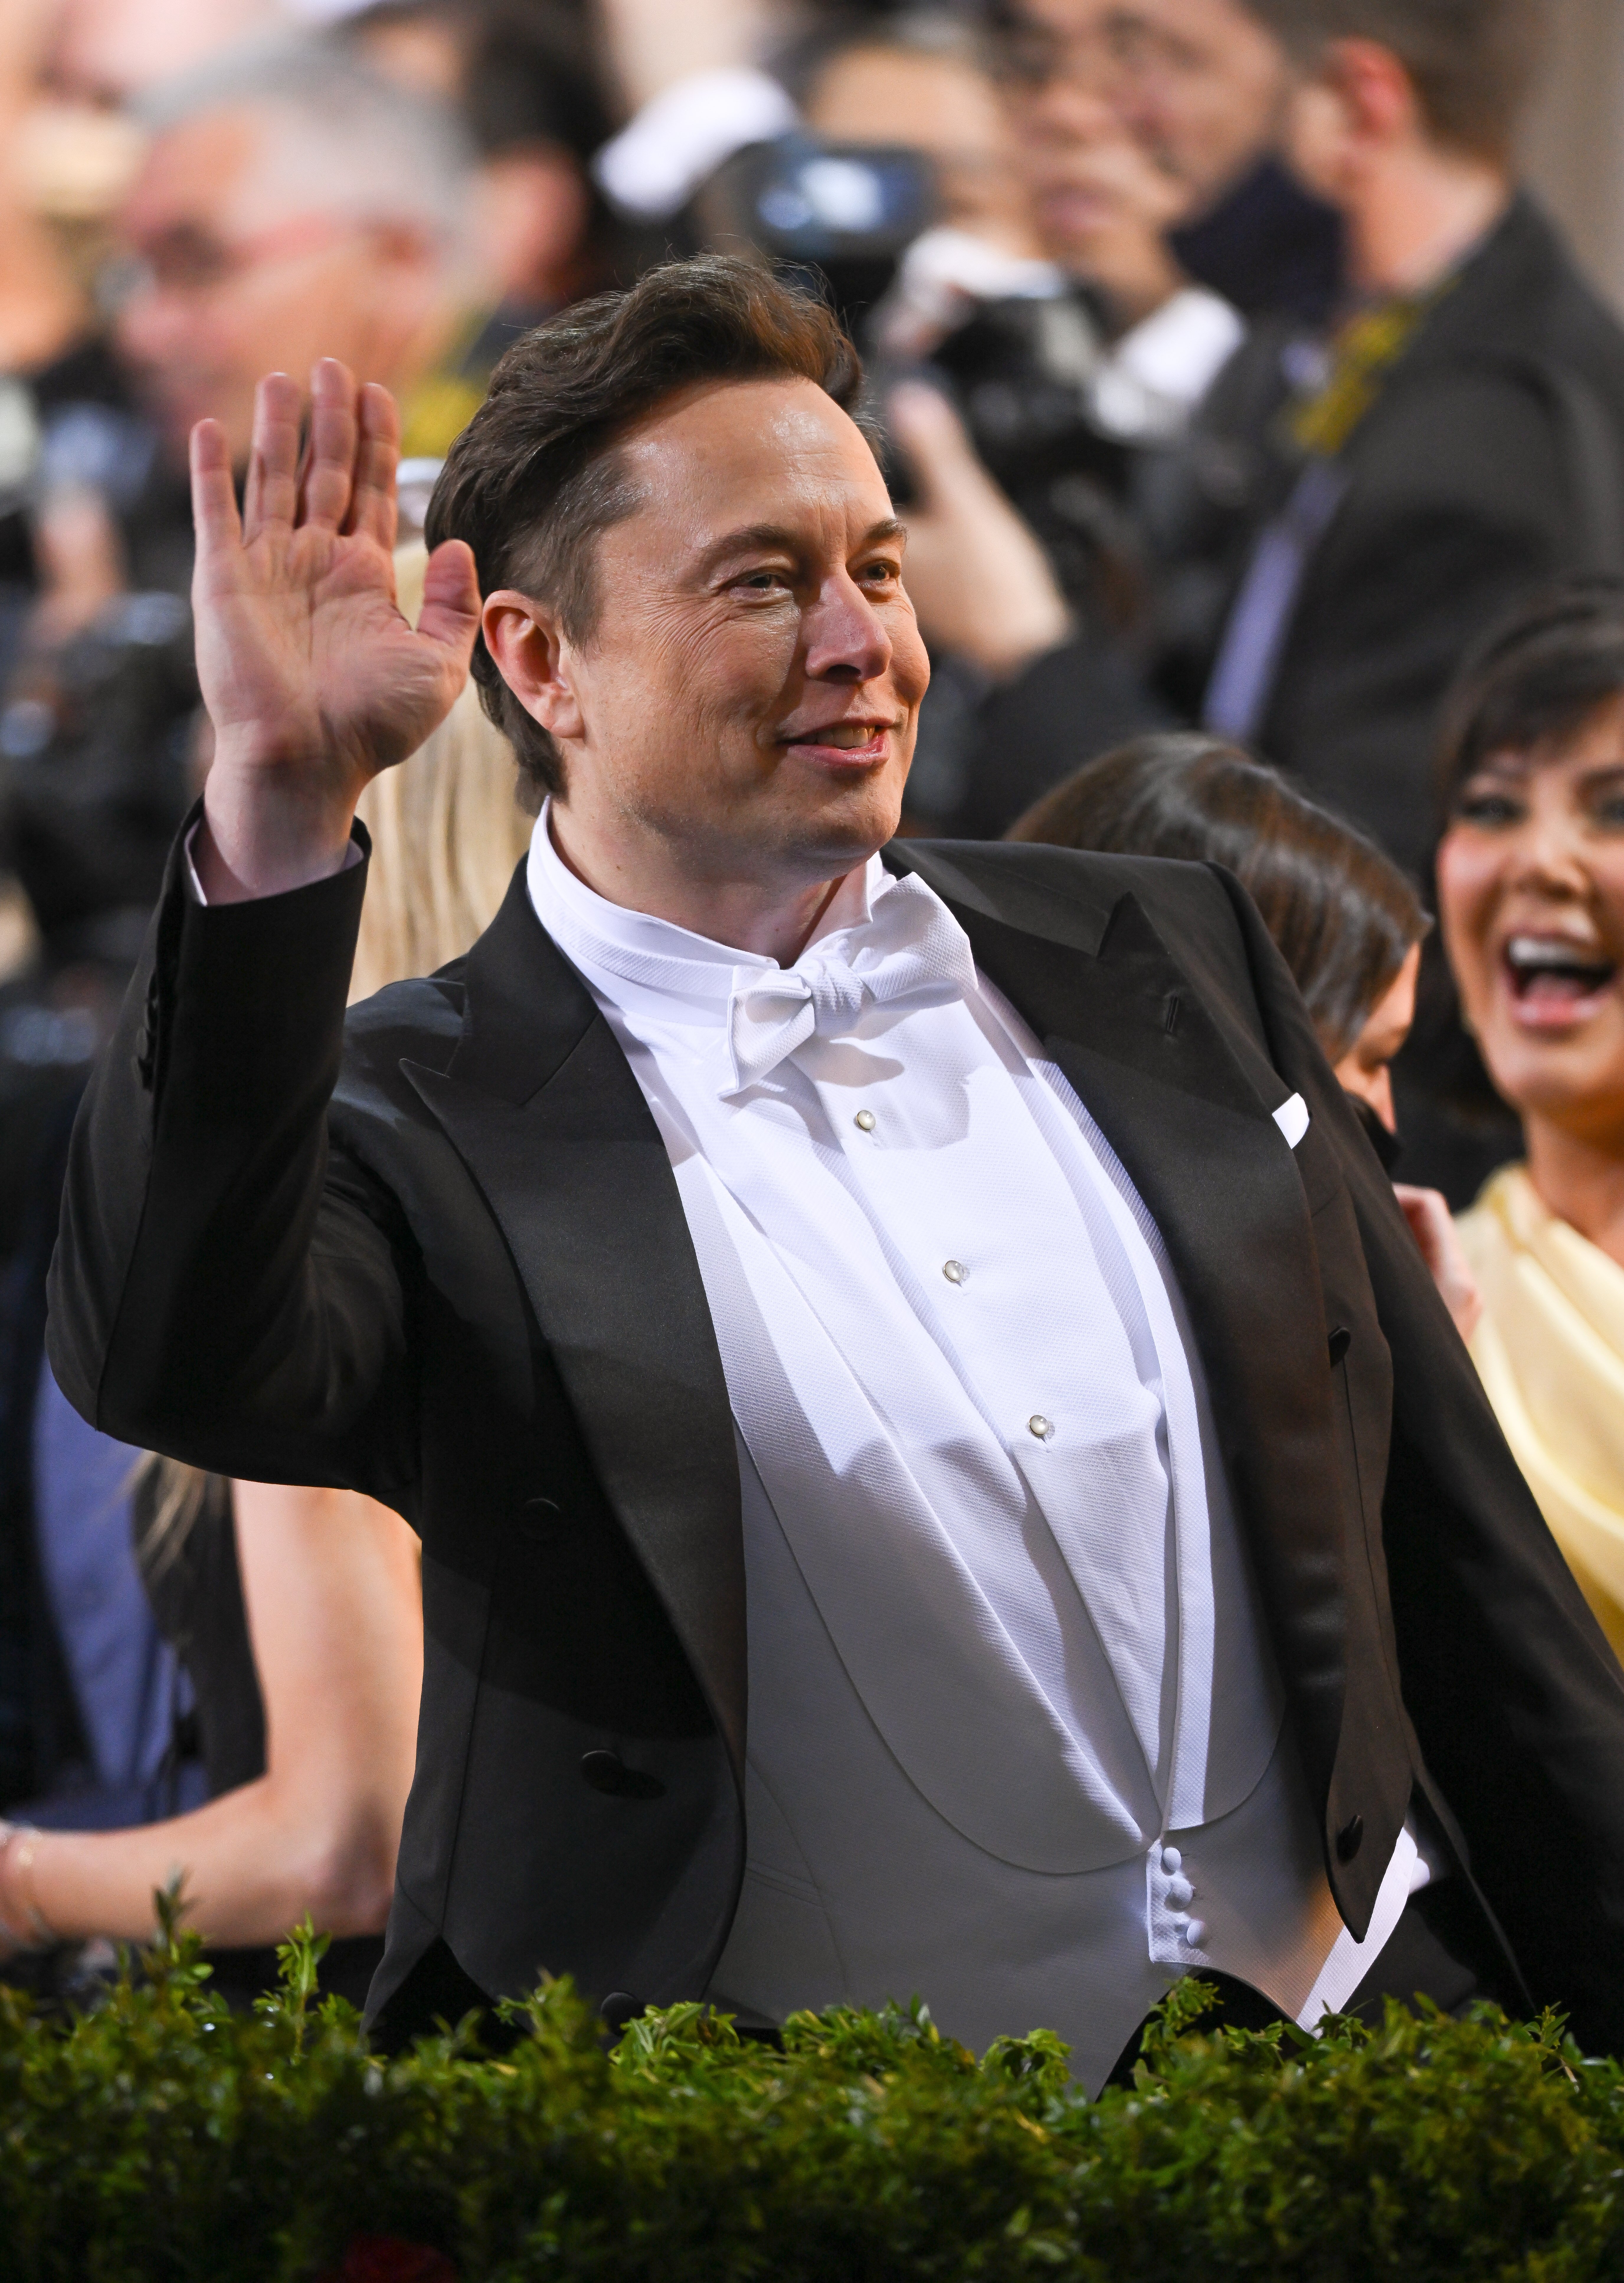 Elon Musk arrives to the 2022 Met Gala Celebrating "In America: An Anthology of Fashion" at Metropolitan Museum of Art on May 02, 2022, in New York City | Source: Getty Images